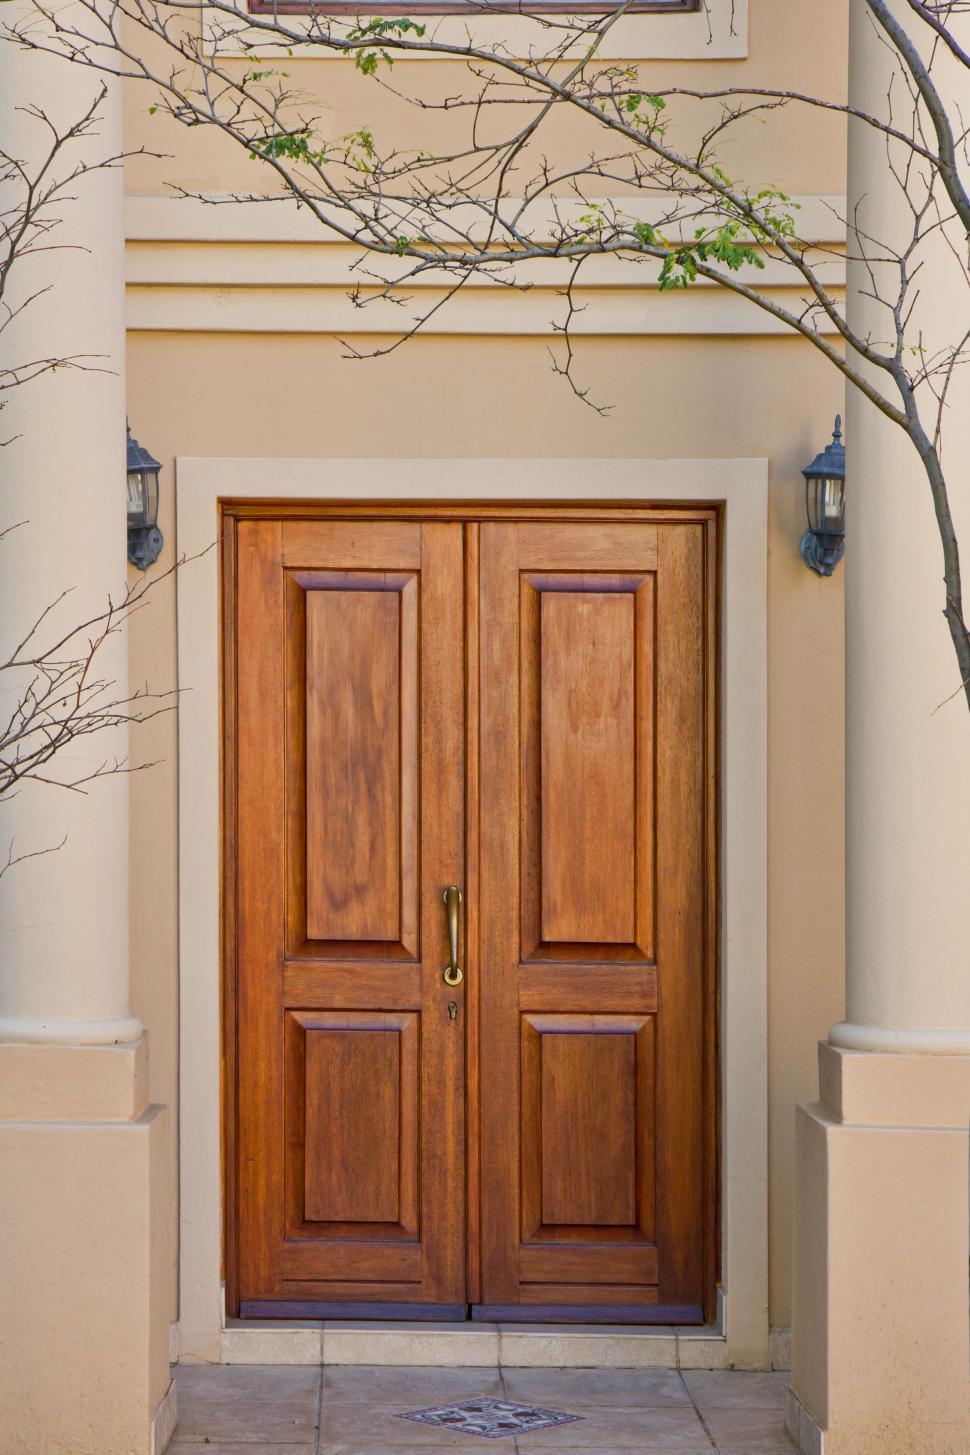 Free Image of Wooden Doors Leading to House Entrance 